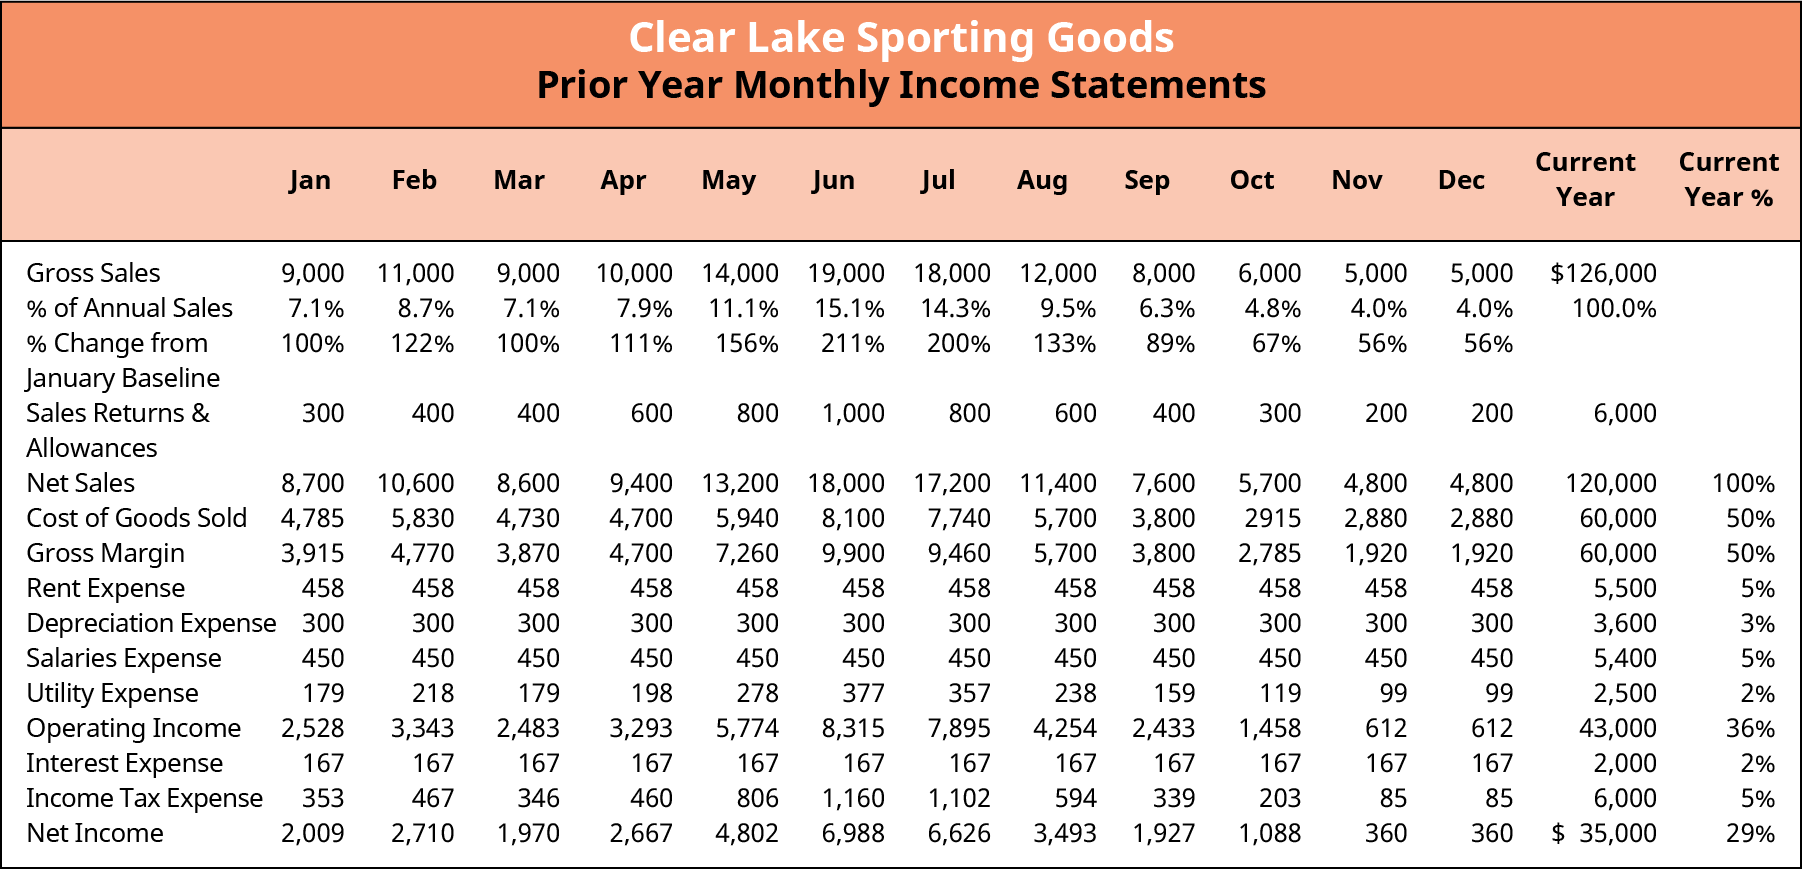 Prior year monthly income statement by month. It shows the gross monthly sales from January to December, and calculates the net income for all of the previous twelve months.